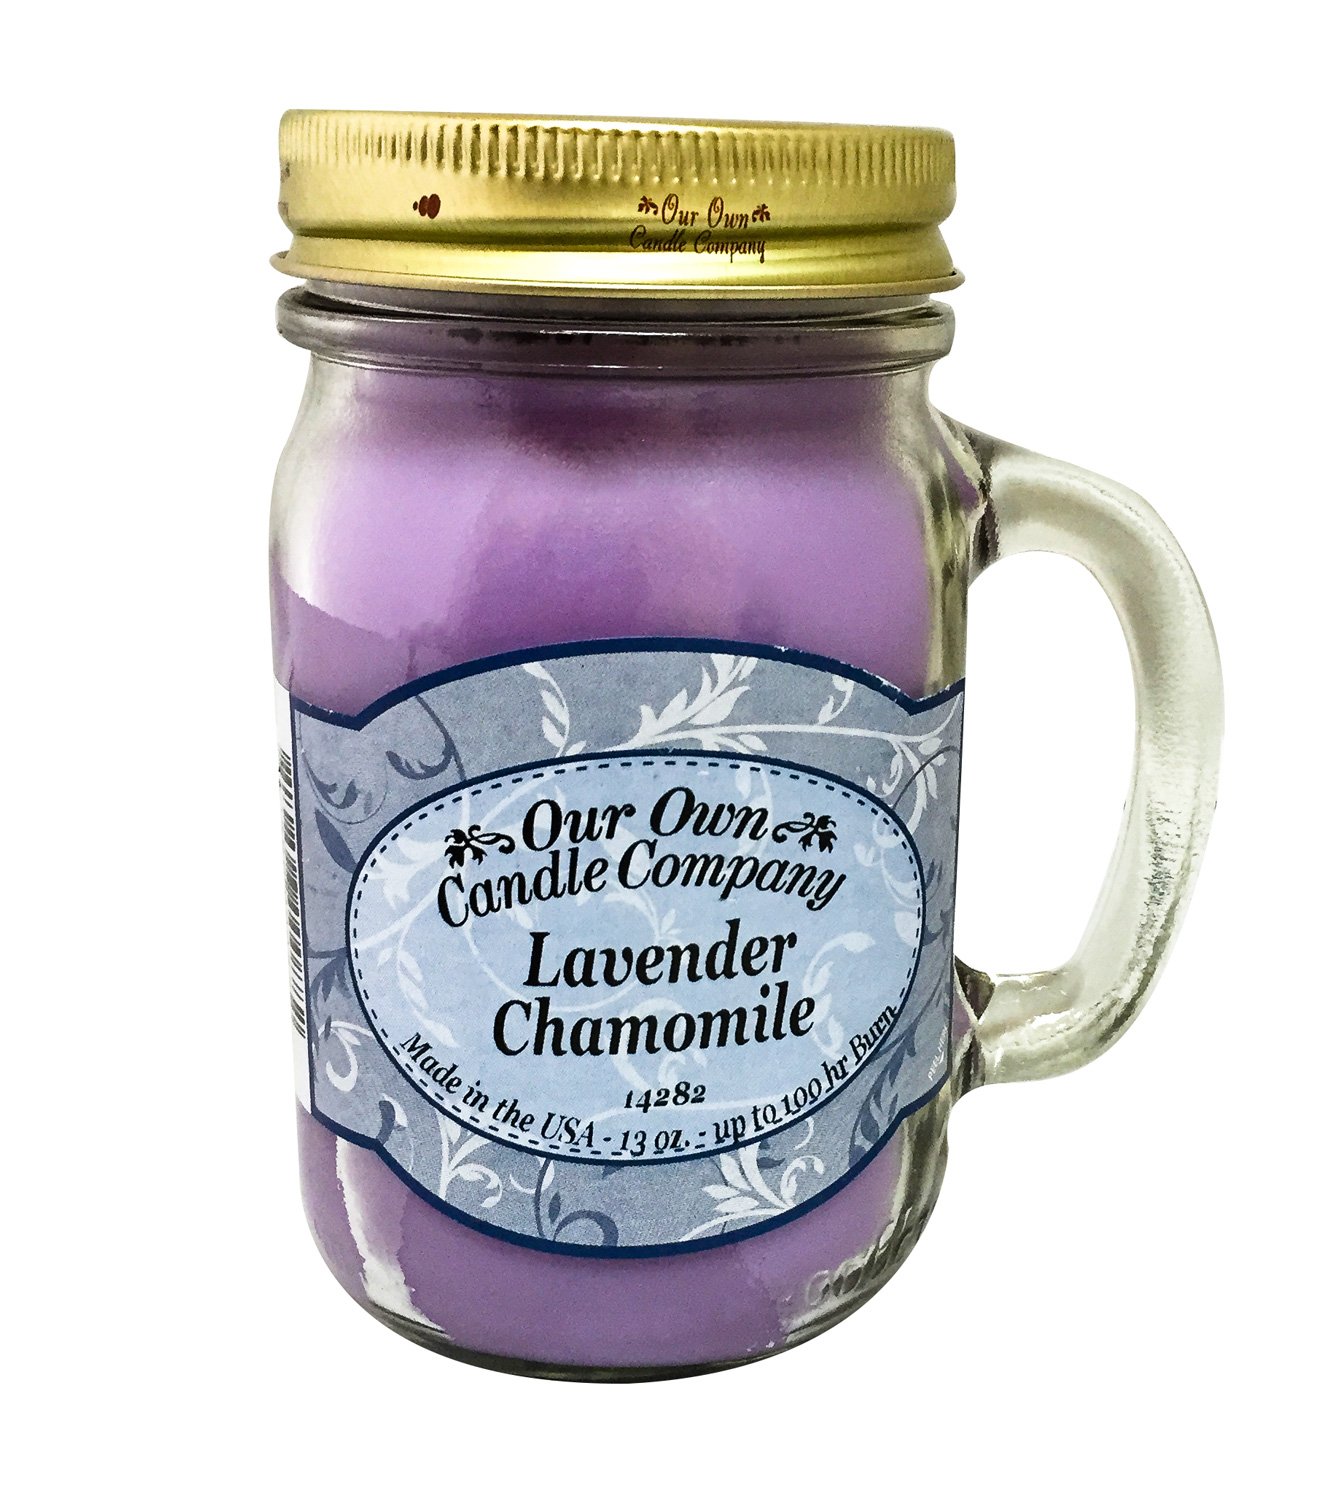 chamomile and lavender scented candle 